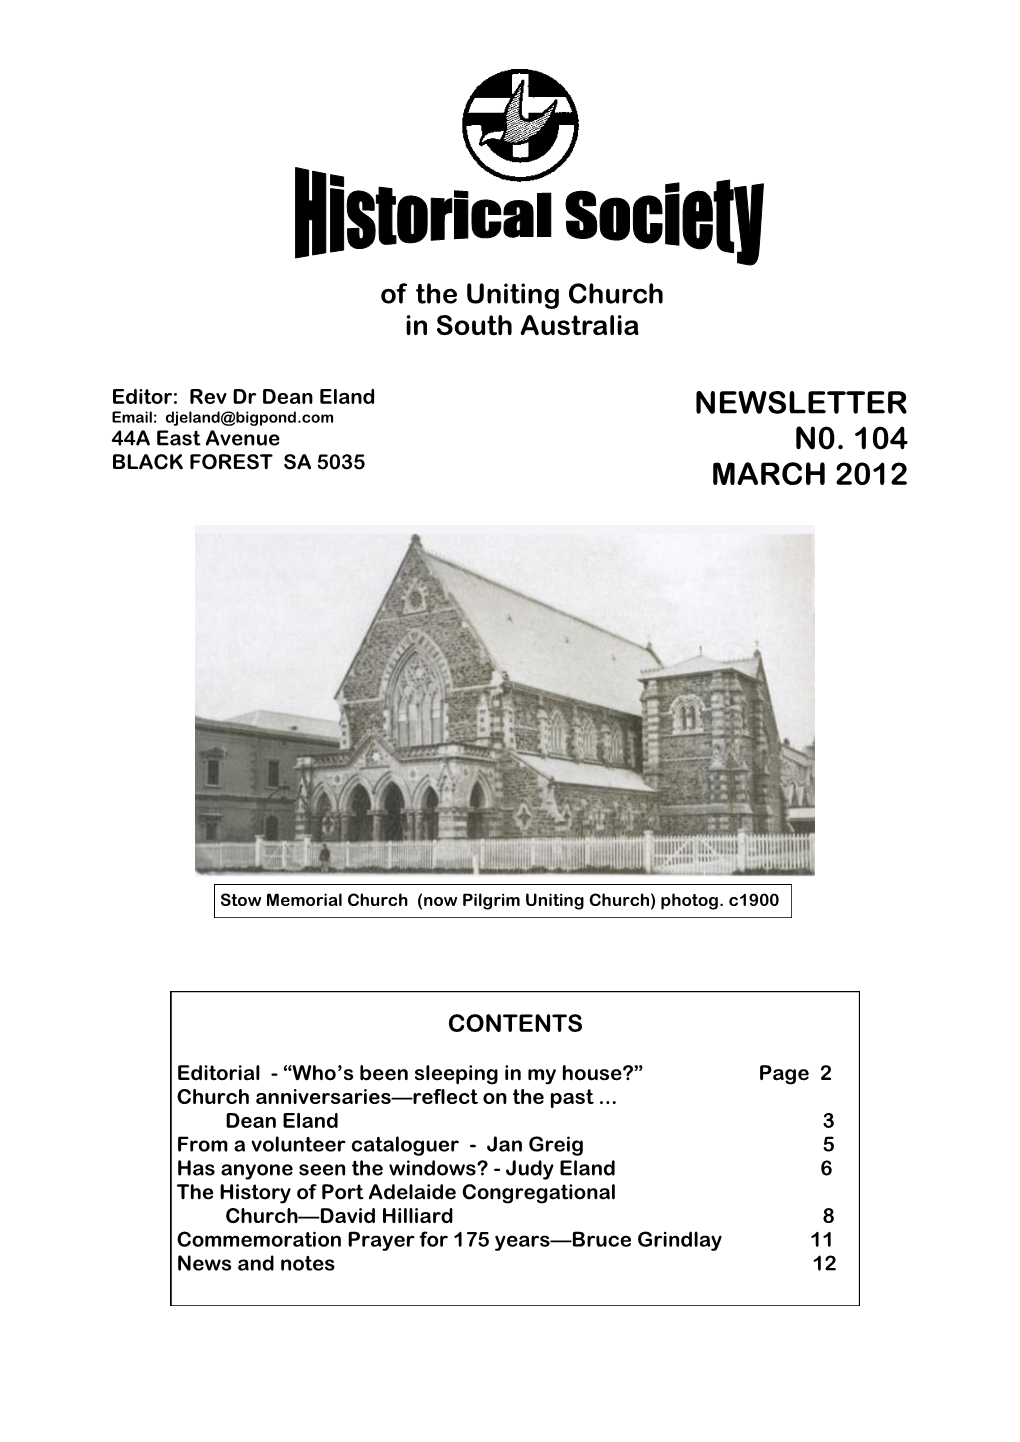 NEWSLETTER N0. 104 MARCH 2012 of the Uniting Church in South